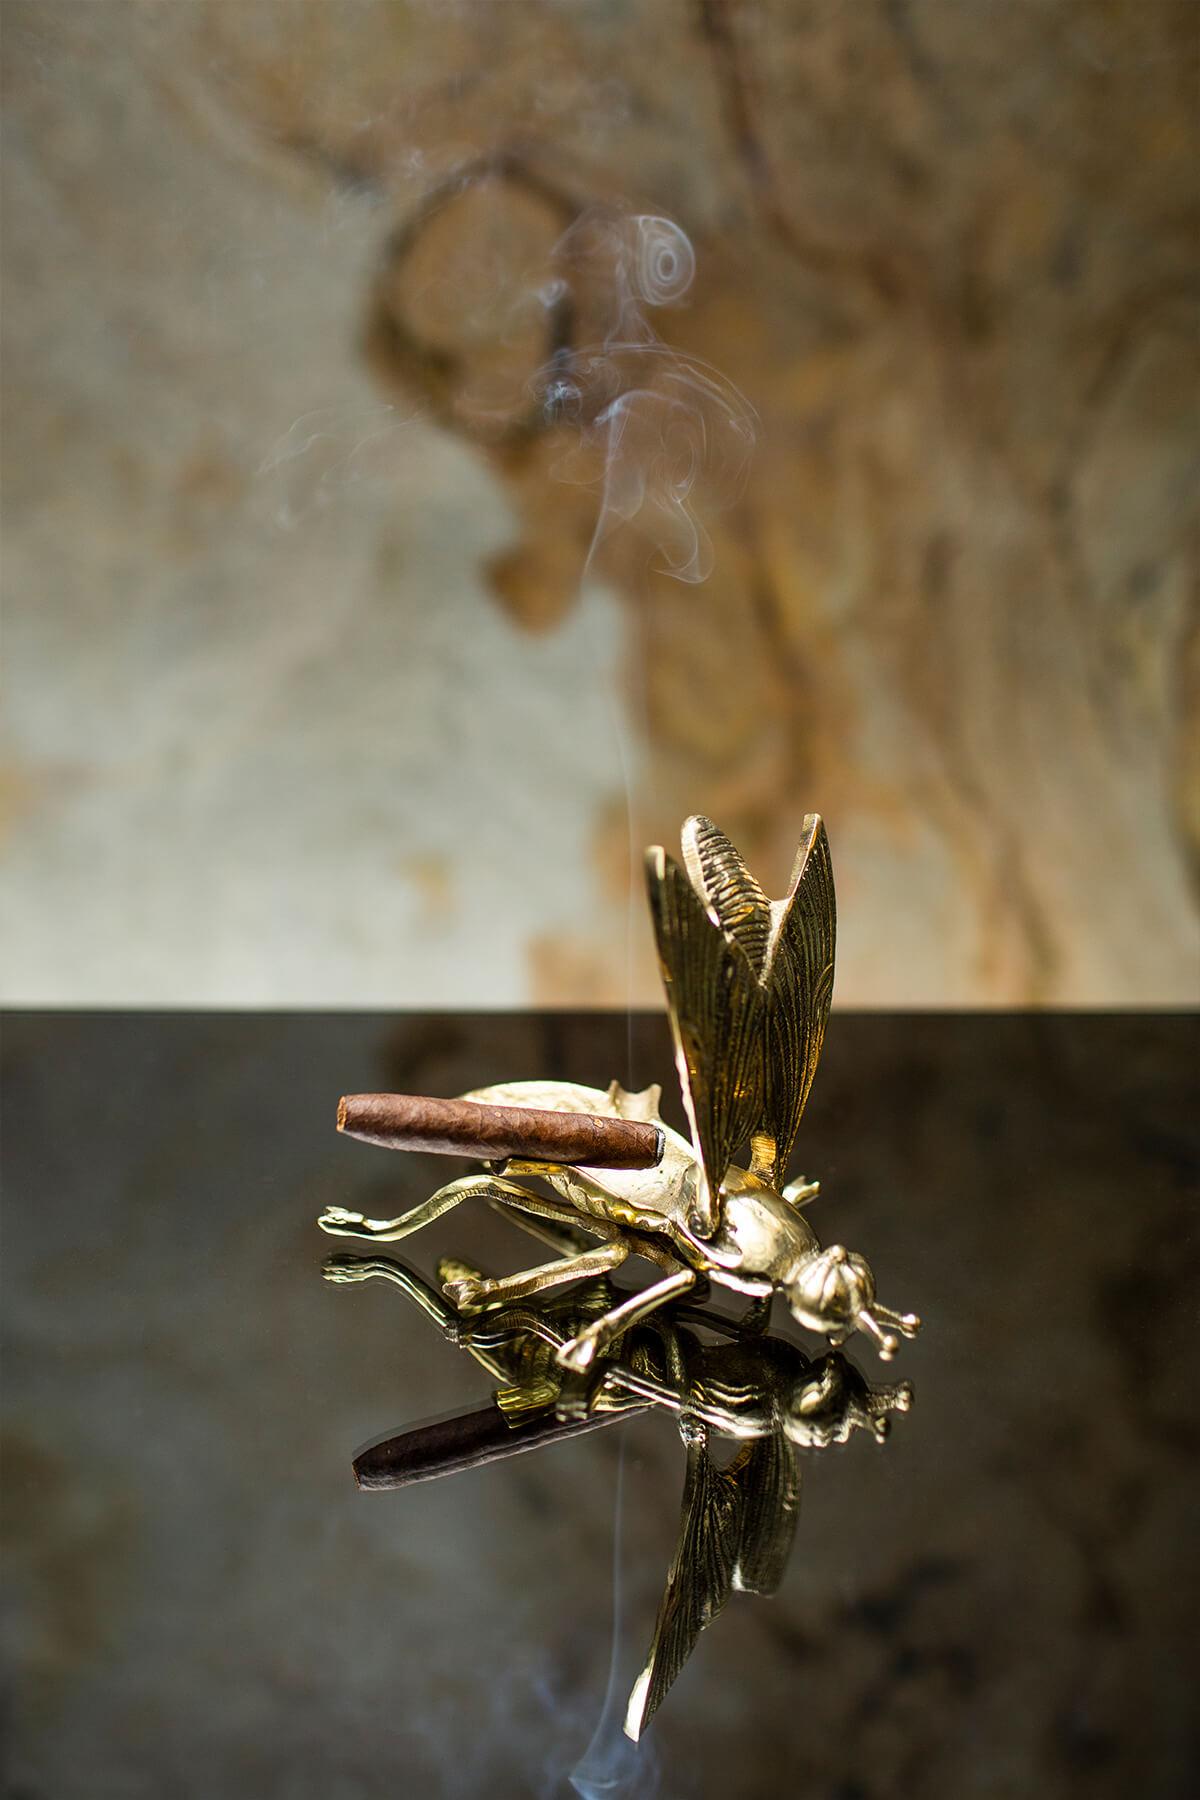 - Brass decorative object in a fly form.
- It would be a very nice, small collectable object for your interiors.
- Brass ashtray
- The lid opens by raising its wings.

BRASS USE AND CARE
Clean surfaces with a dry cloth.
Minimize humidity and